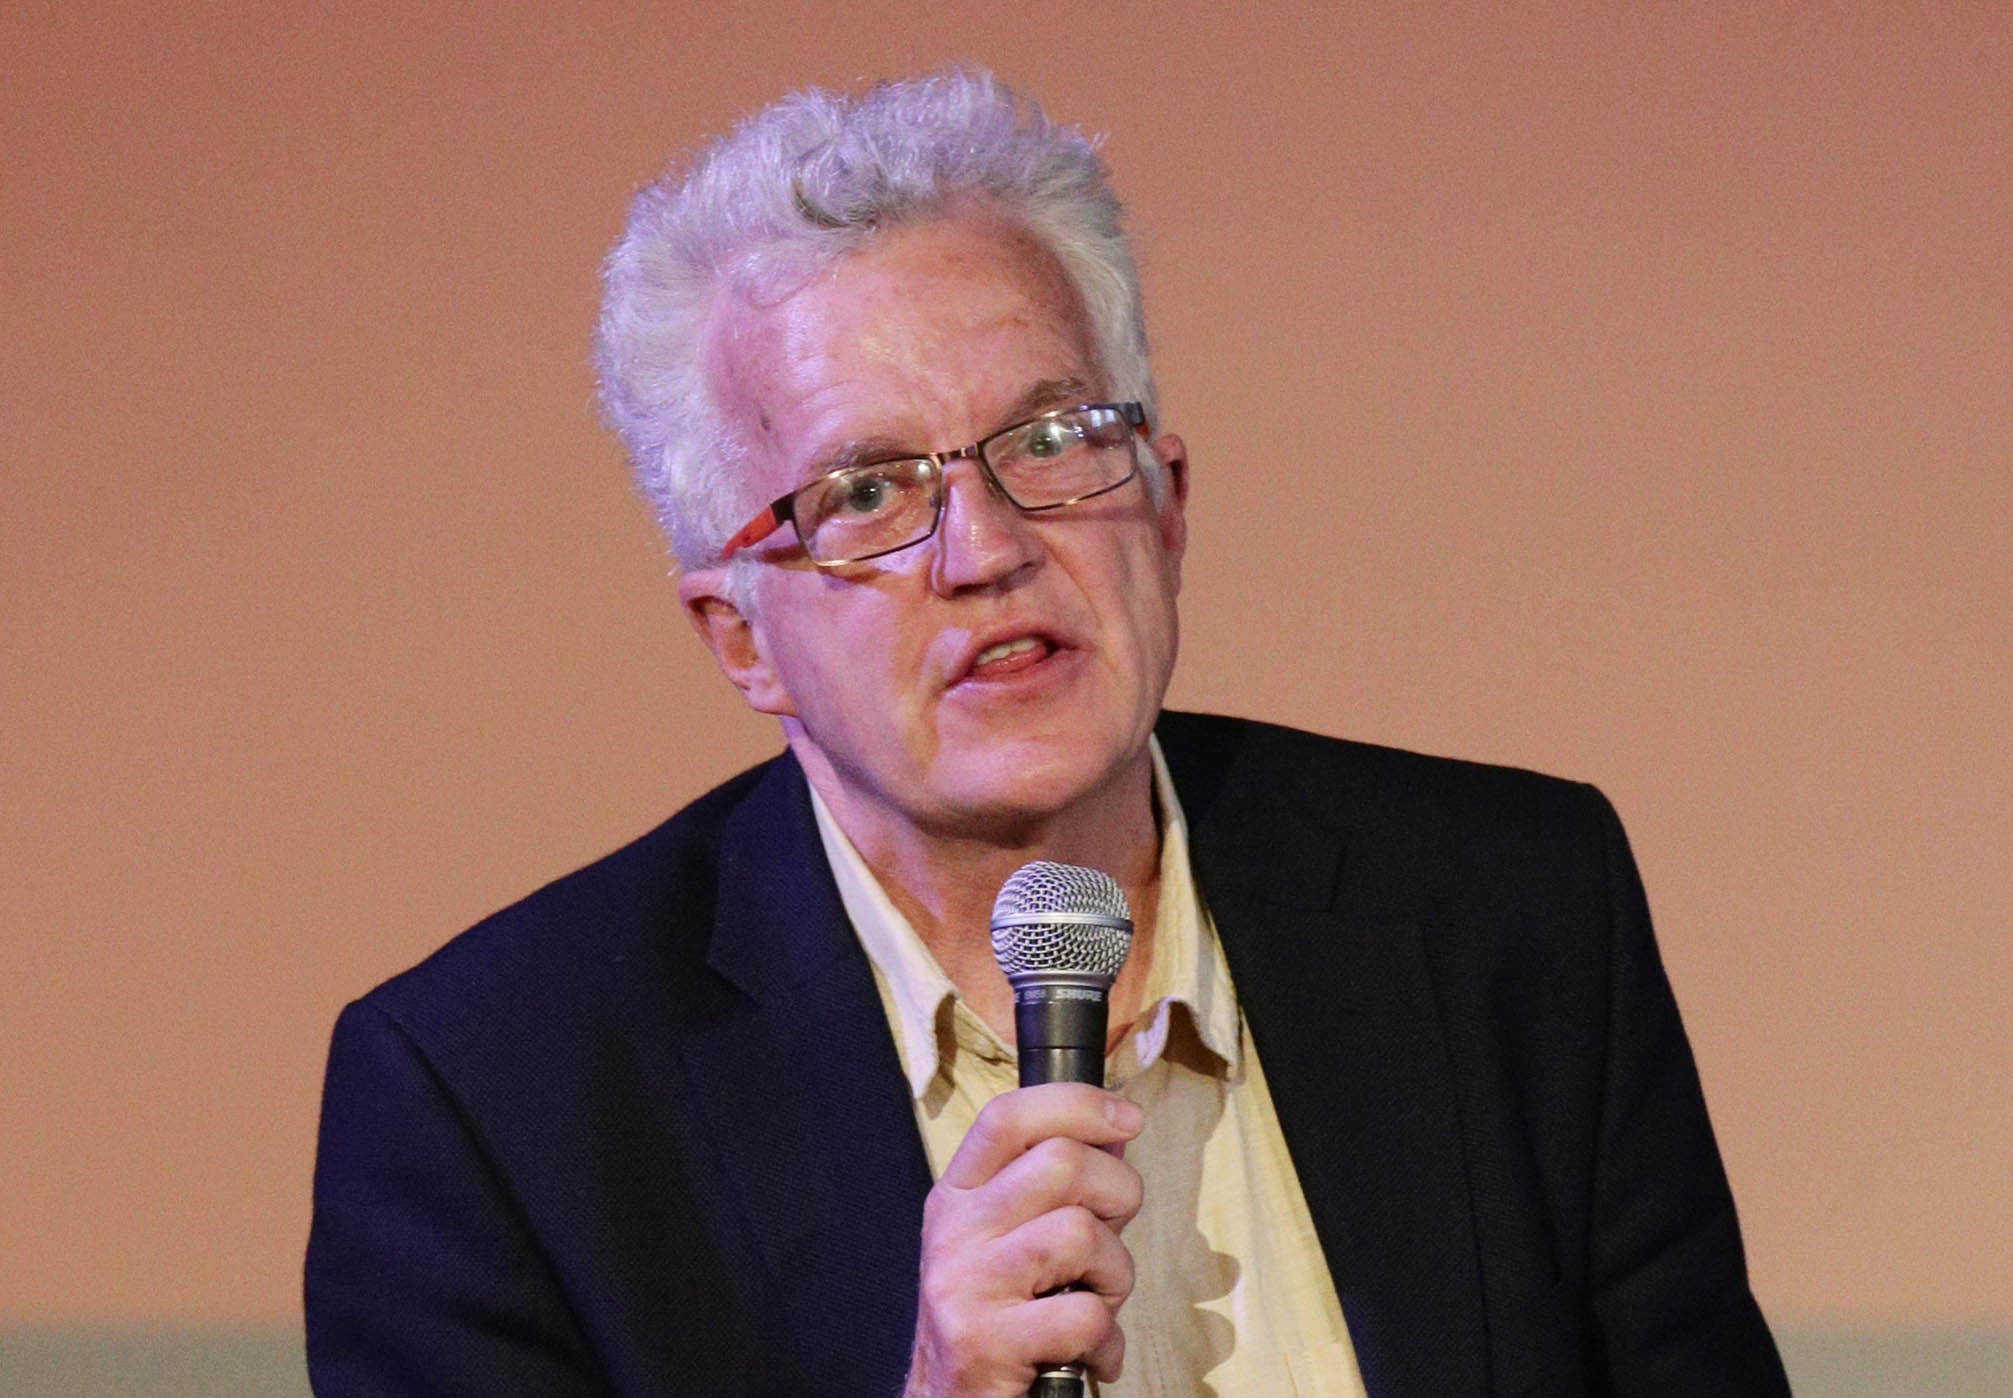 Christian Wolmar, who is running to be Labour's Mayor of London candidate